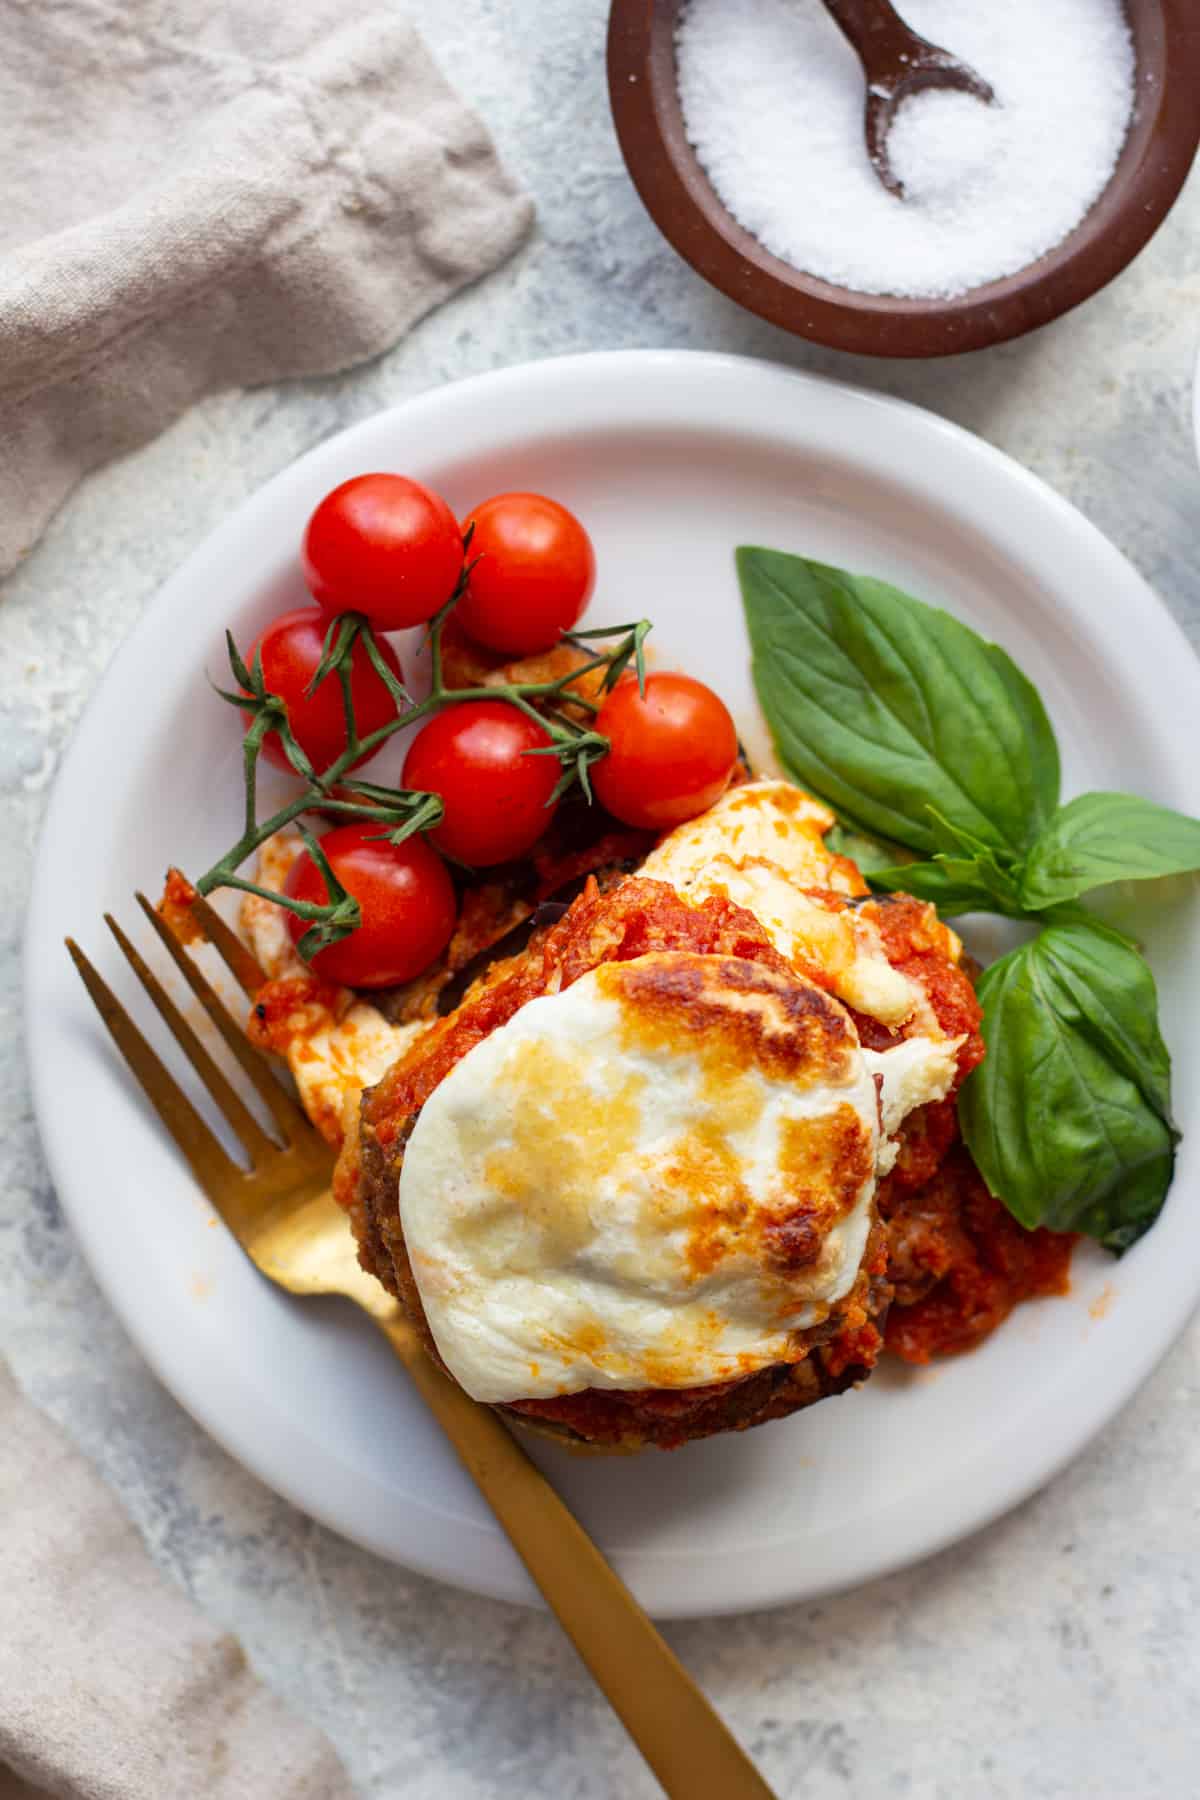 This eggplant parmesan recipe is a classic for good reasons. You can't go wrong with layers of eggplant, cheese and marinara sauce. Learn how to make this eggplant casserole with this easy tutorial (including a special tip that makes this dish special!) and how-to video. 